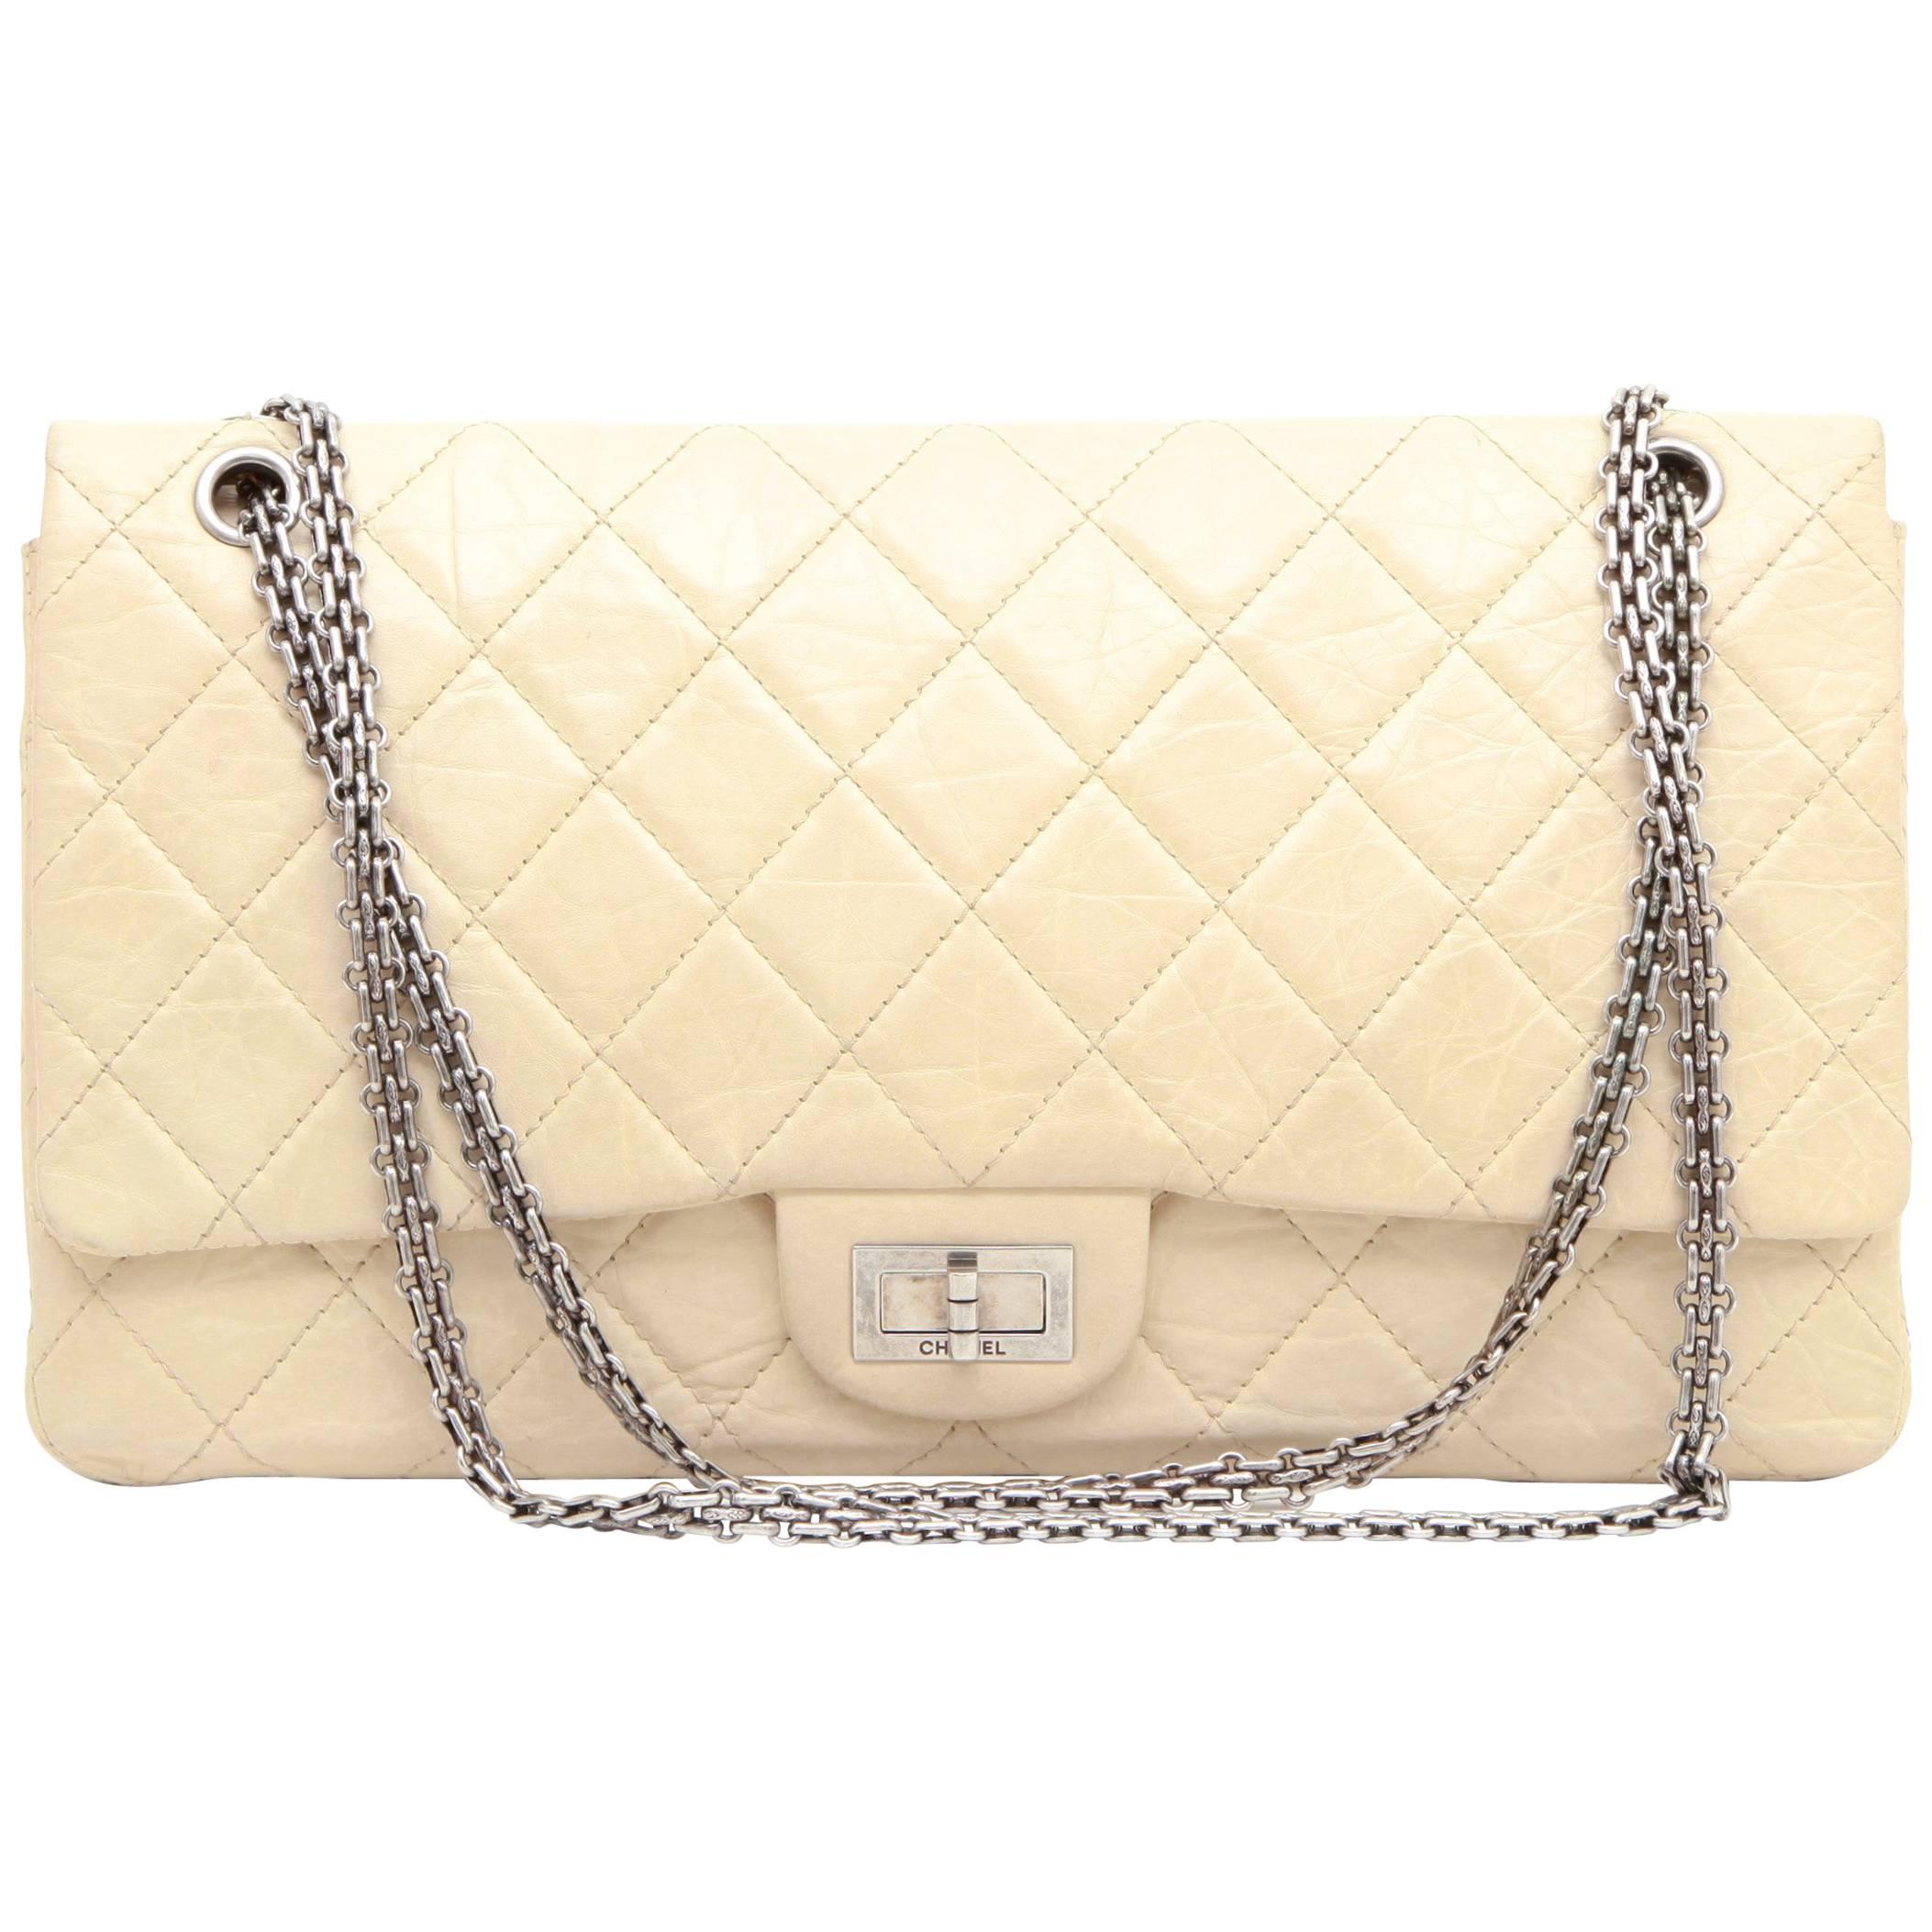 CHANEL 'Maxi Jumbo' Double Flap Bag in Aged Ivory Leather For Sale